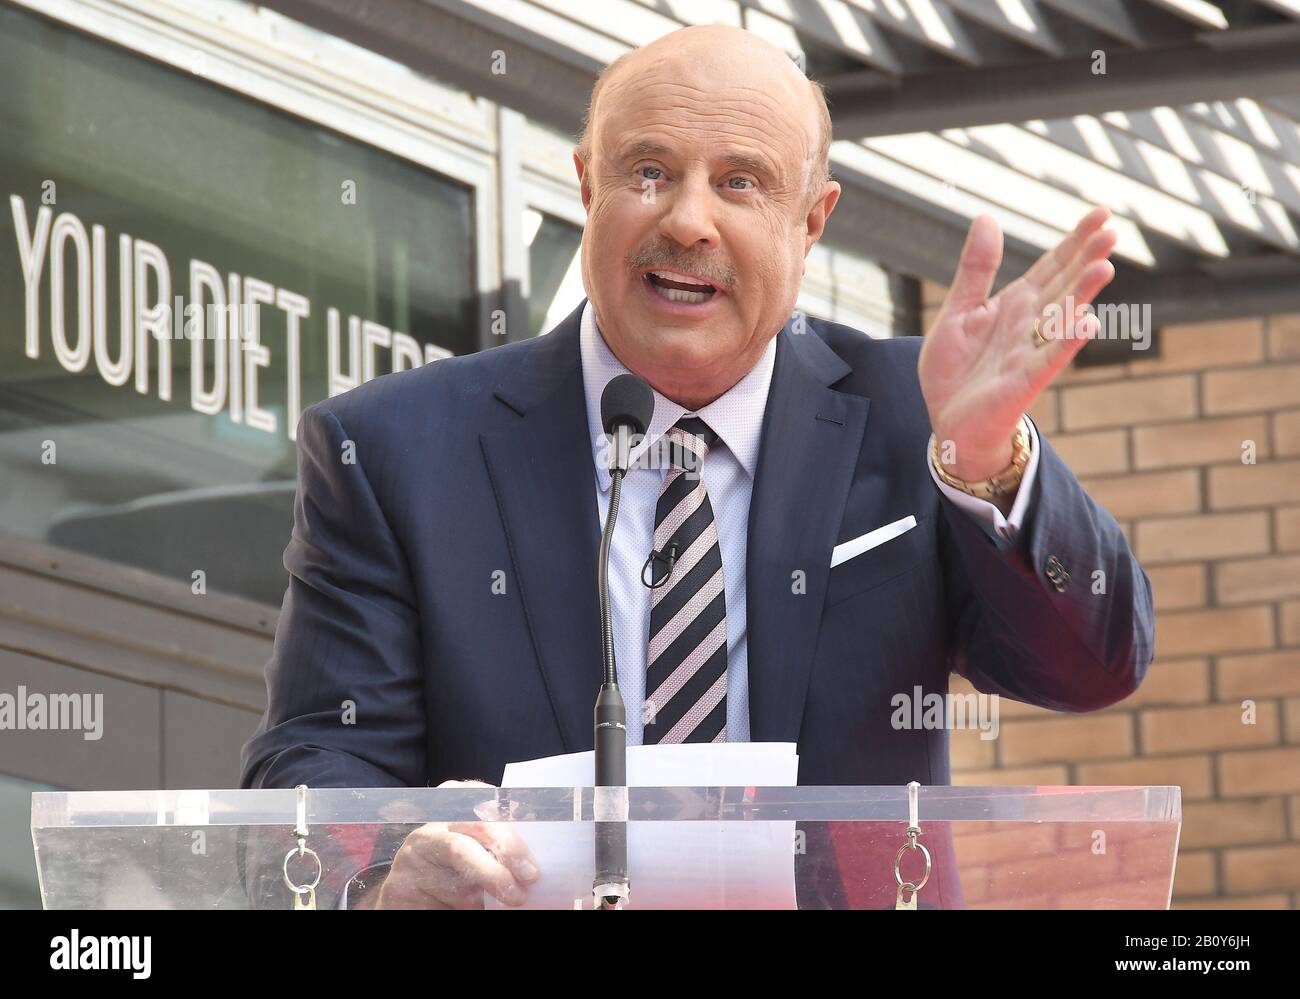 Dr. Phil McGraw Honored With Star On The Hollywood Walk Of Fame Ceremony held in front of the Eastown Development in Hollywood, CA on Friday, February 21, 2020 (Photo By Sthanlee B. Mirador/Sipa USA) Stock Photo